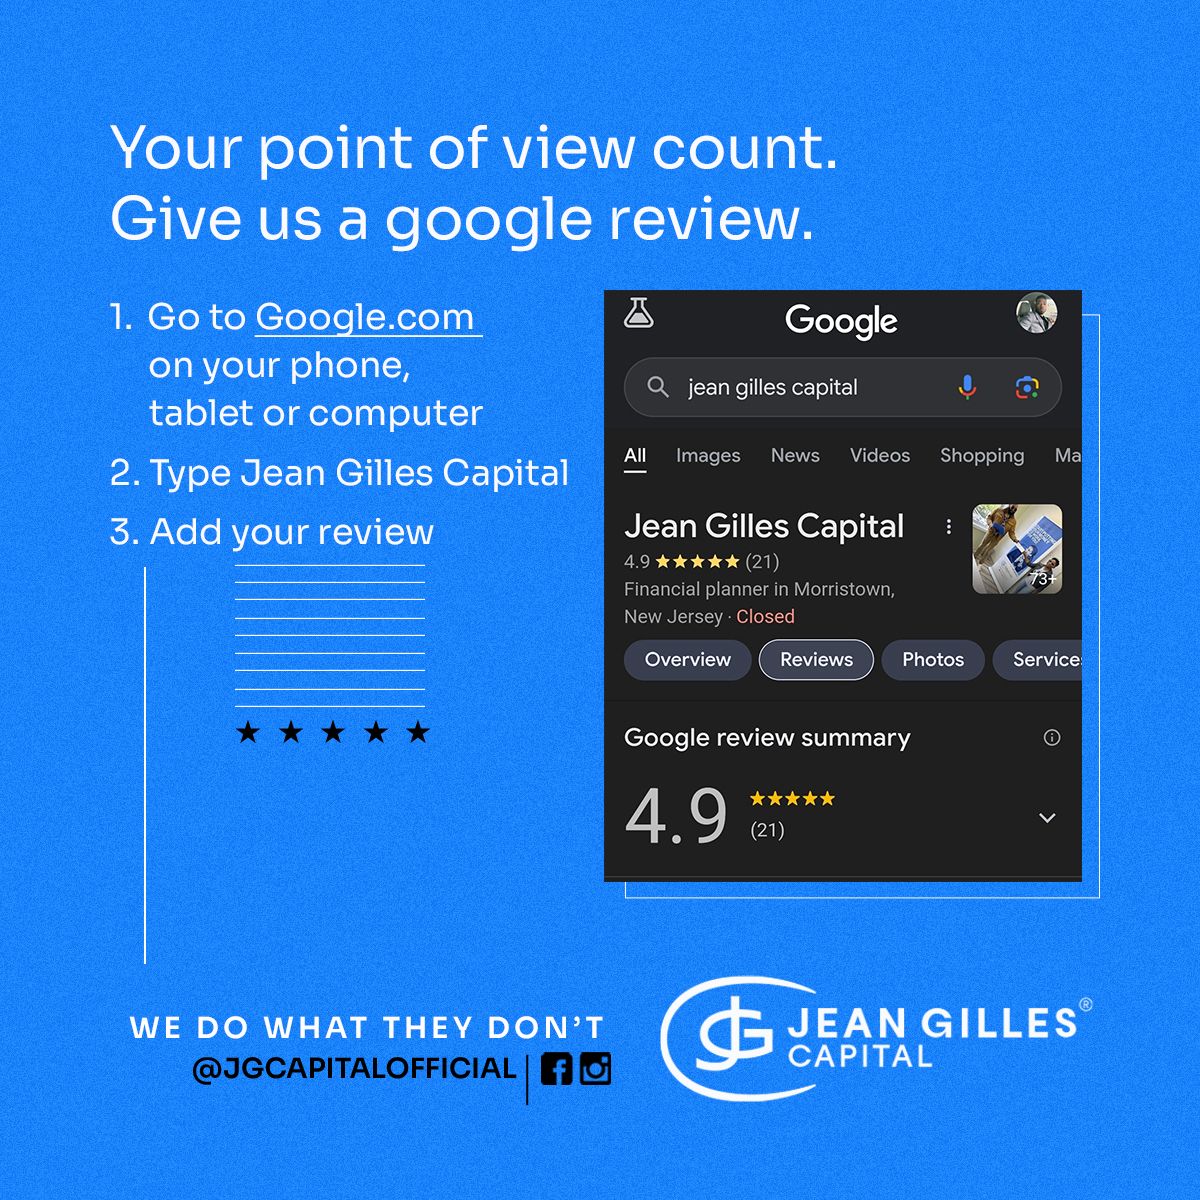 MAKE YOUR VOICE COUNT: LEAVE A GOOGLE REVIEW TODAY